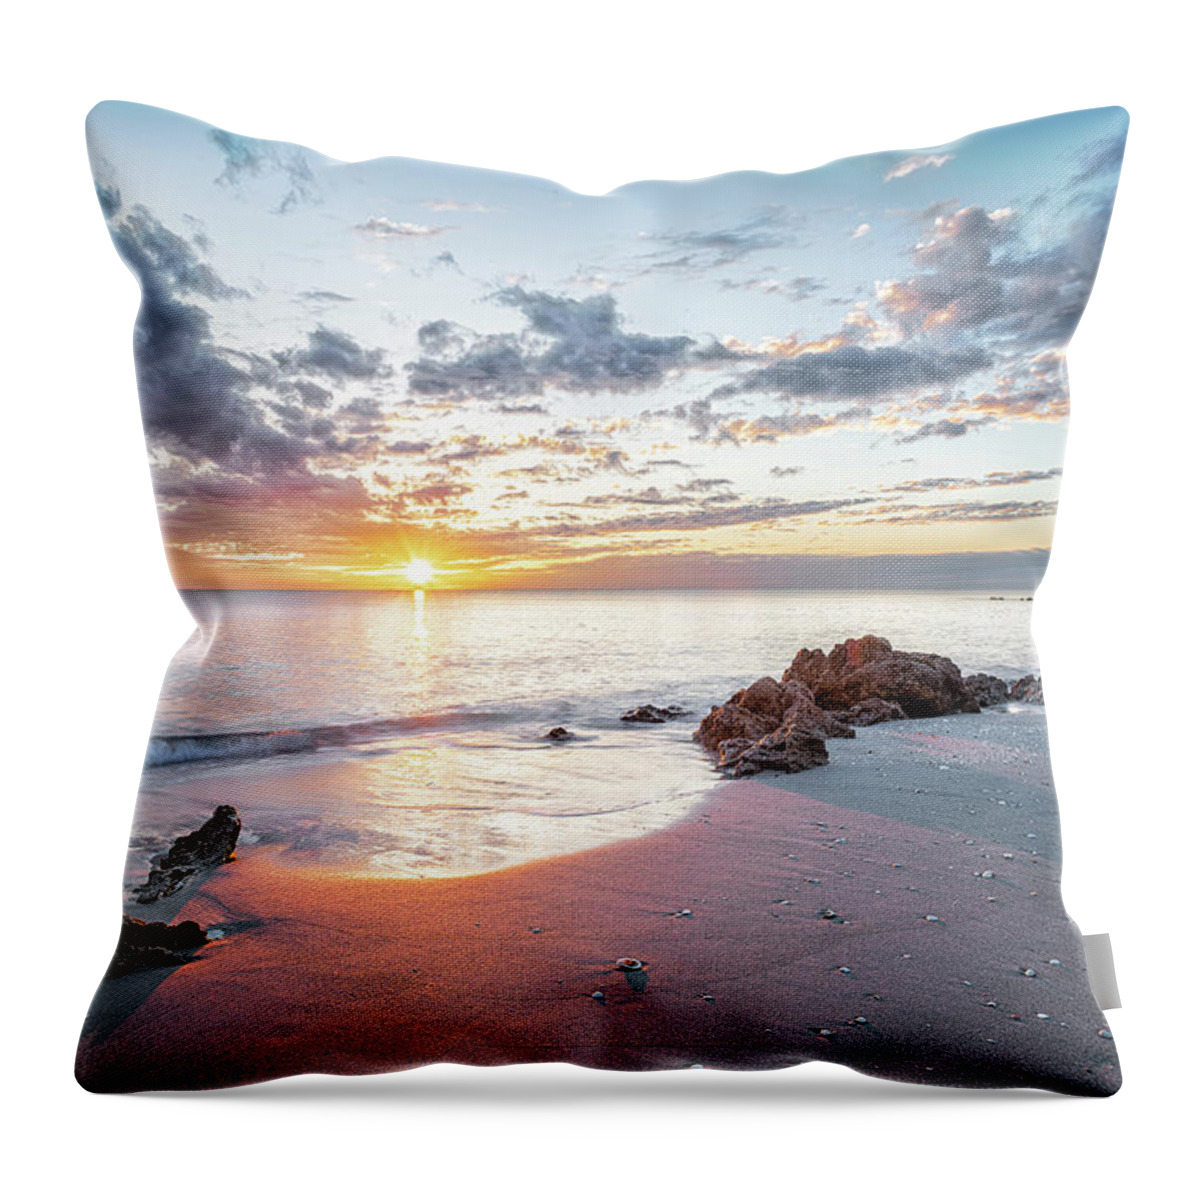 Gulf Of Mexico Throw Pillow featuring the photograph Caspersen Beach Sunset Glow by Rudy Wilms